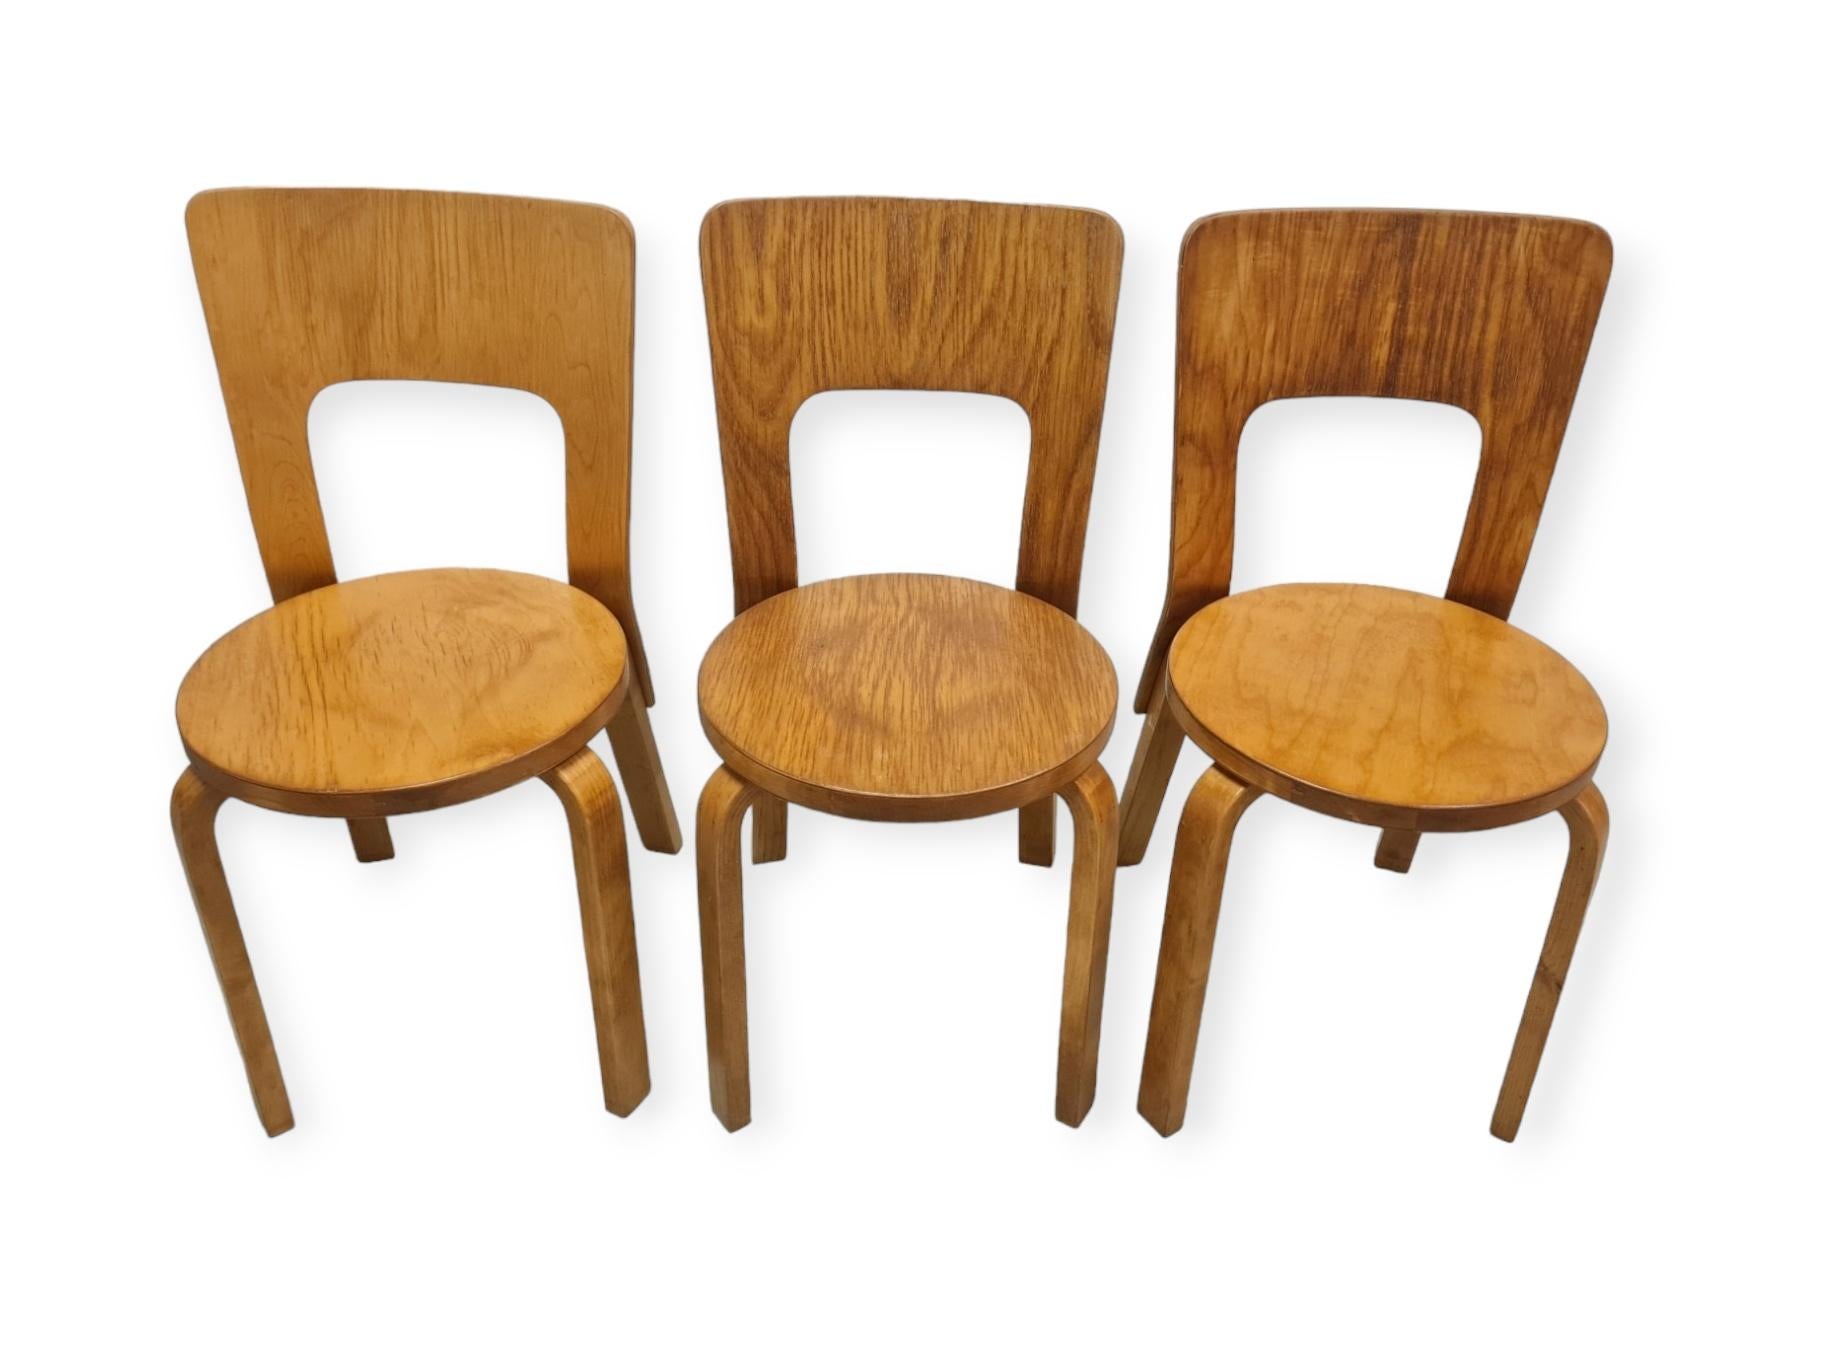 Alvar Aalto Dinning Set with Lazy Susan and 6 Model 66 chairs, 1940s For Sale 8